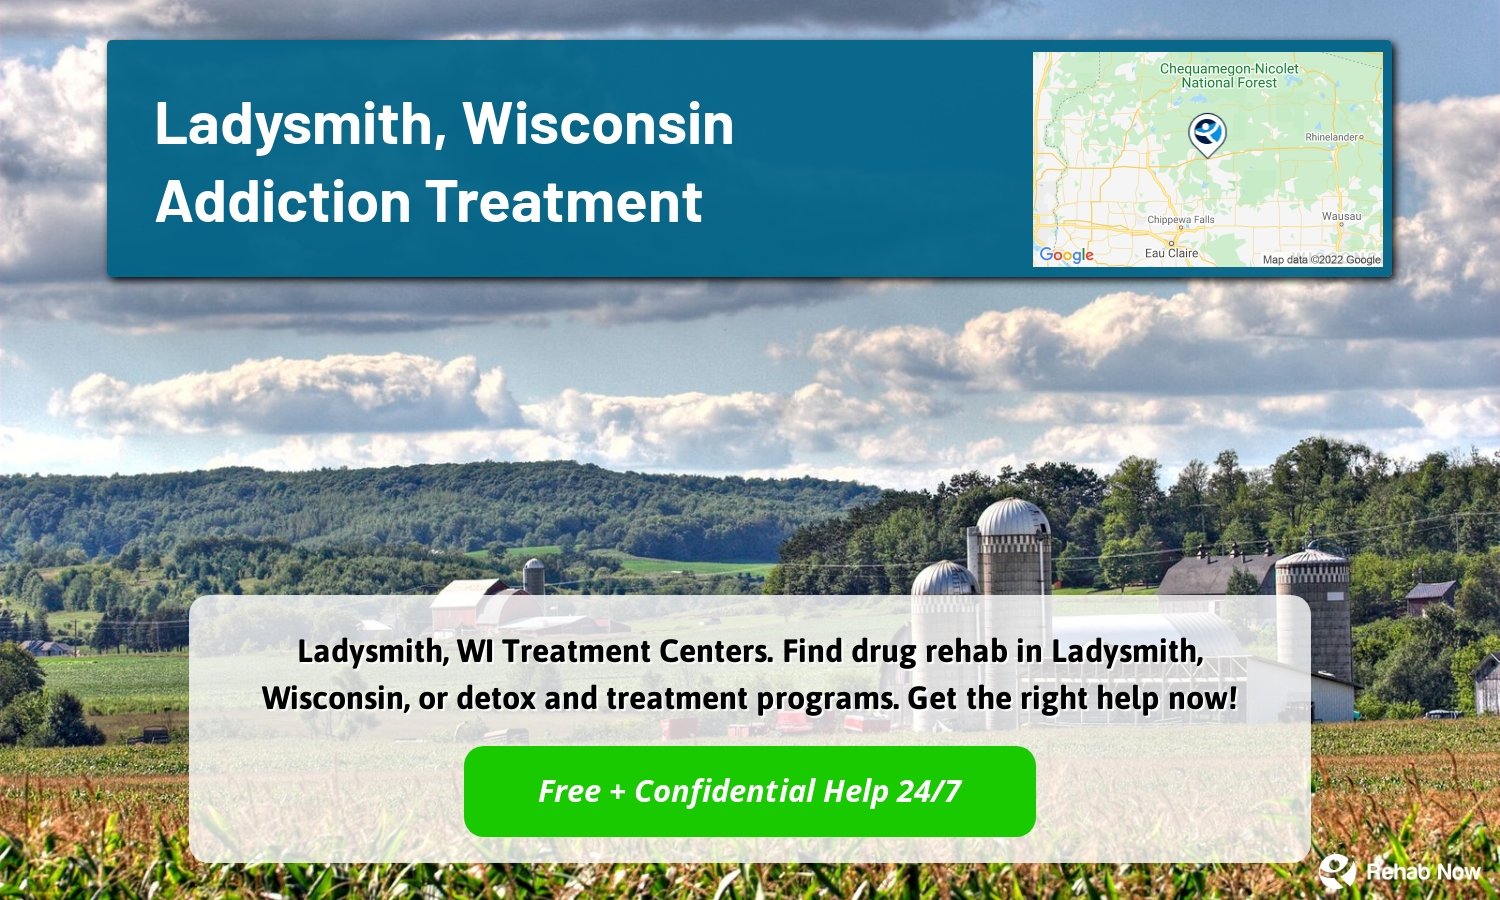 Ladysmith, WI Treatment Centers. Find drug rehab in Ladysmith, Wisconsin, or detox and treatment programs. Get the right help now!